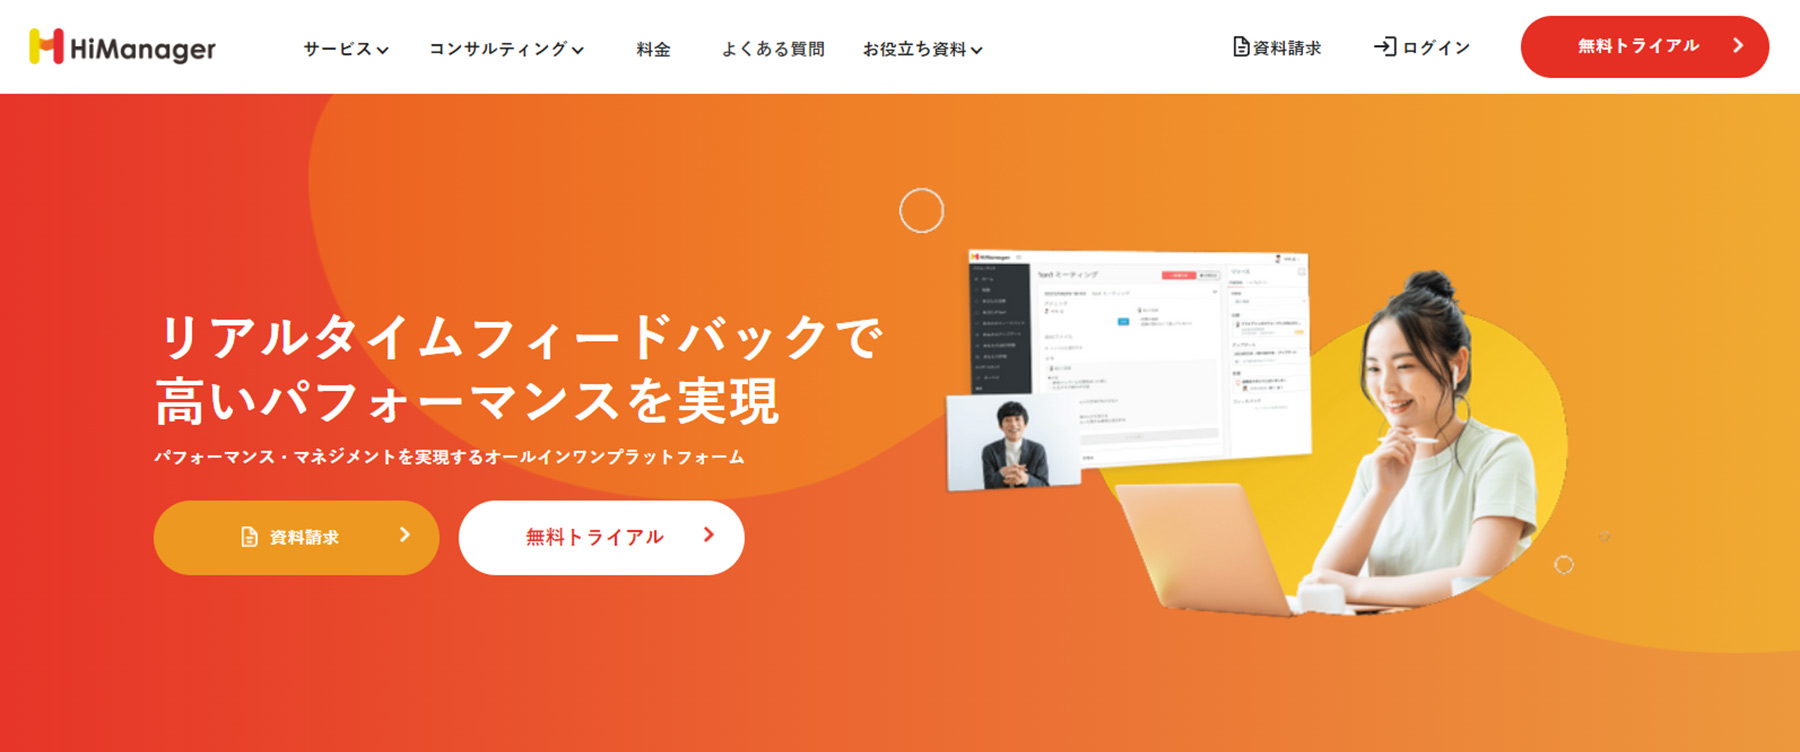 HiManager公式Webサイト